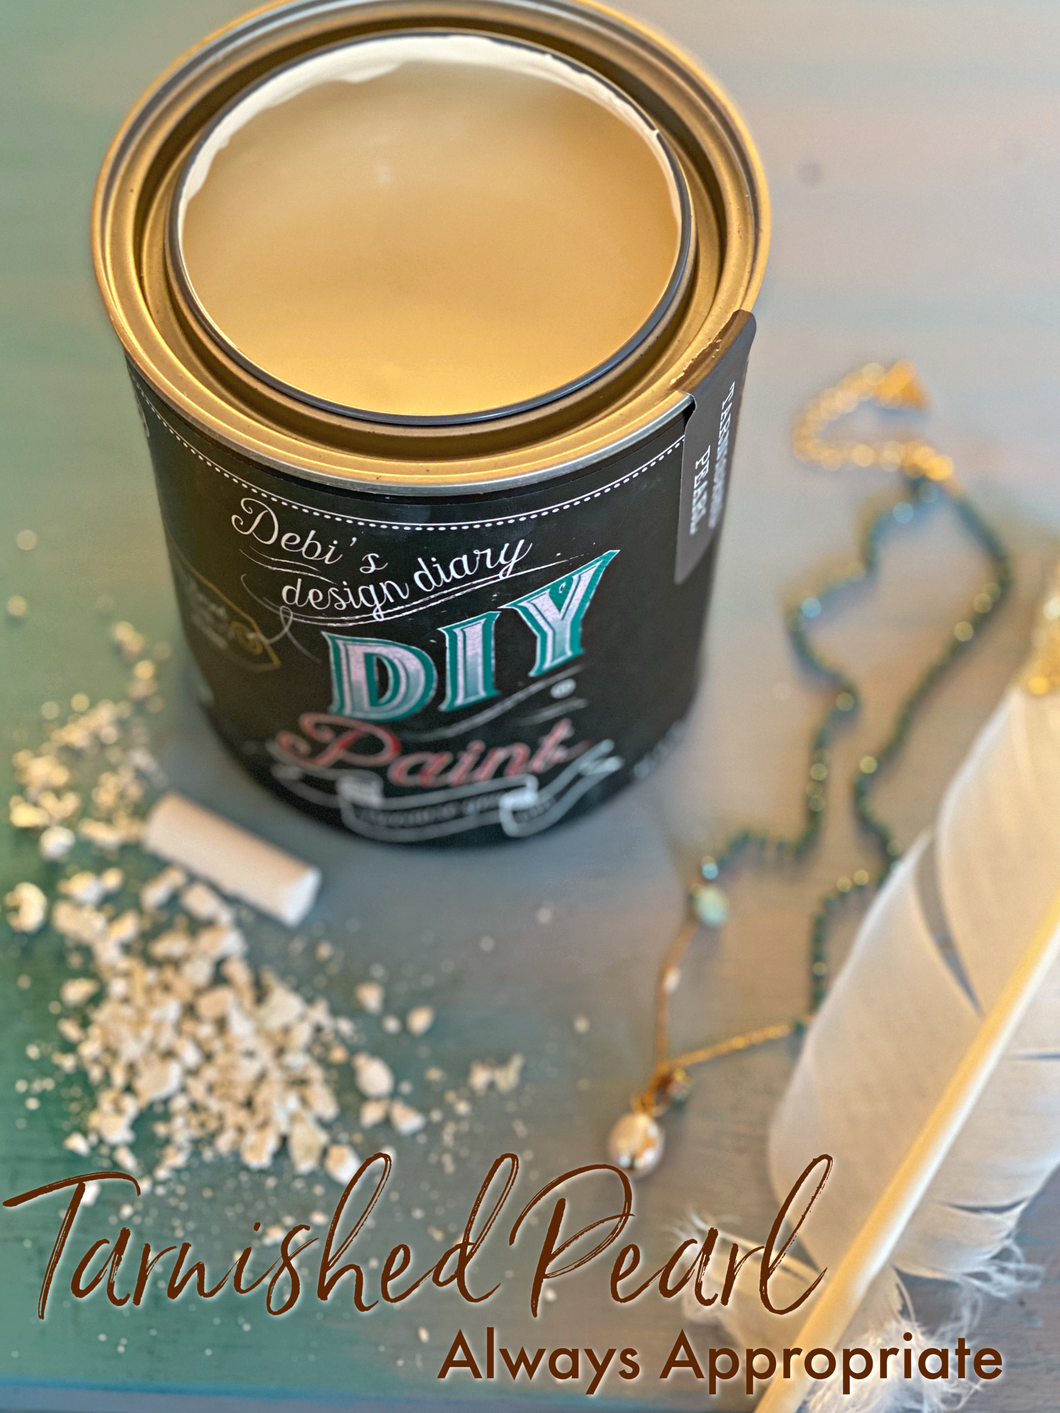 Tarnished Pearl DIY Paint by Debi's Design Diary